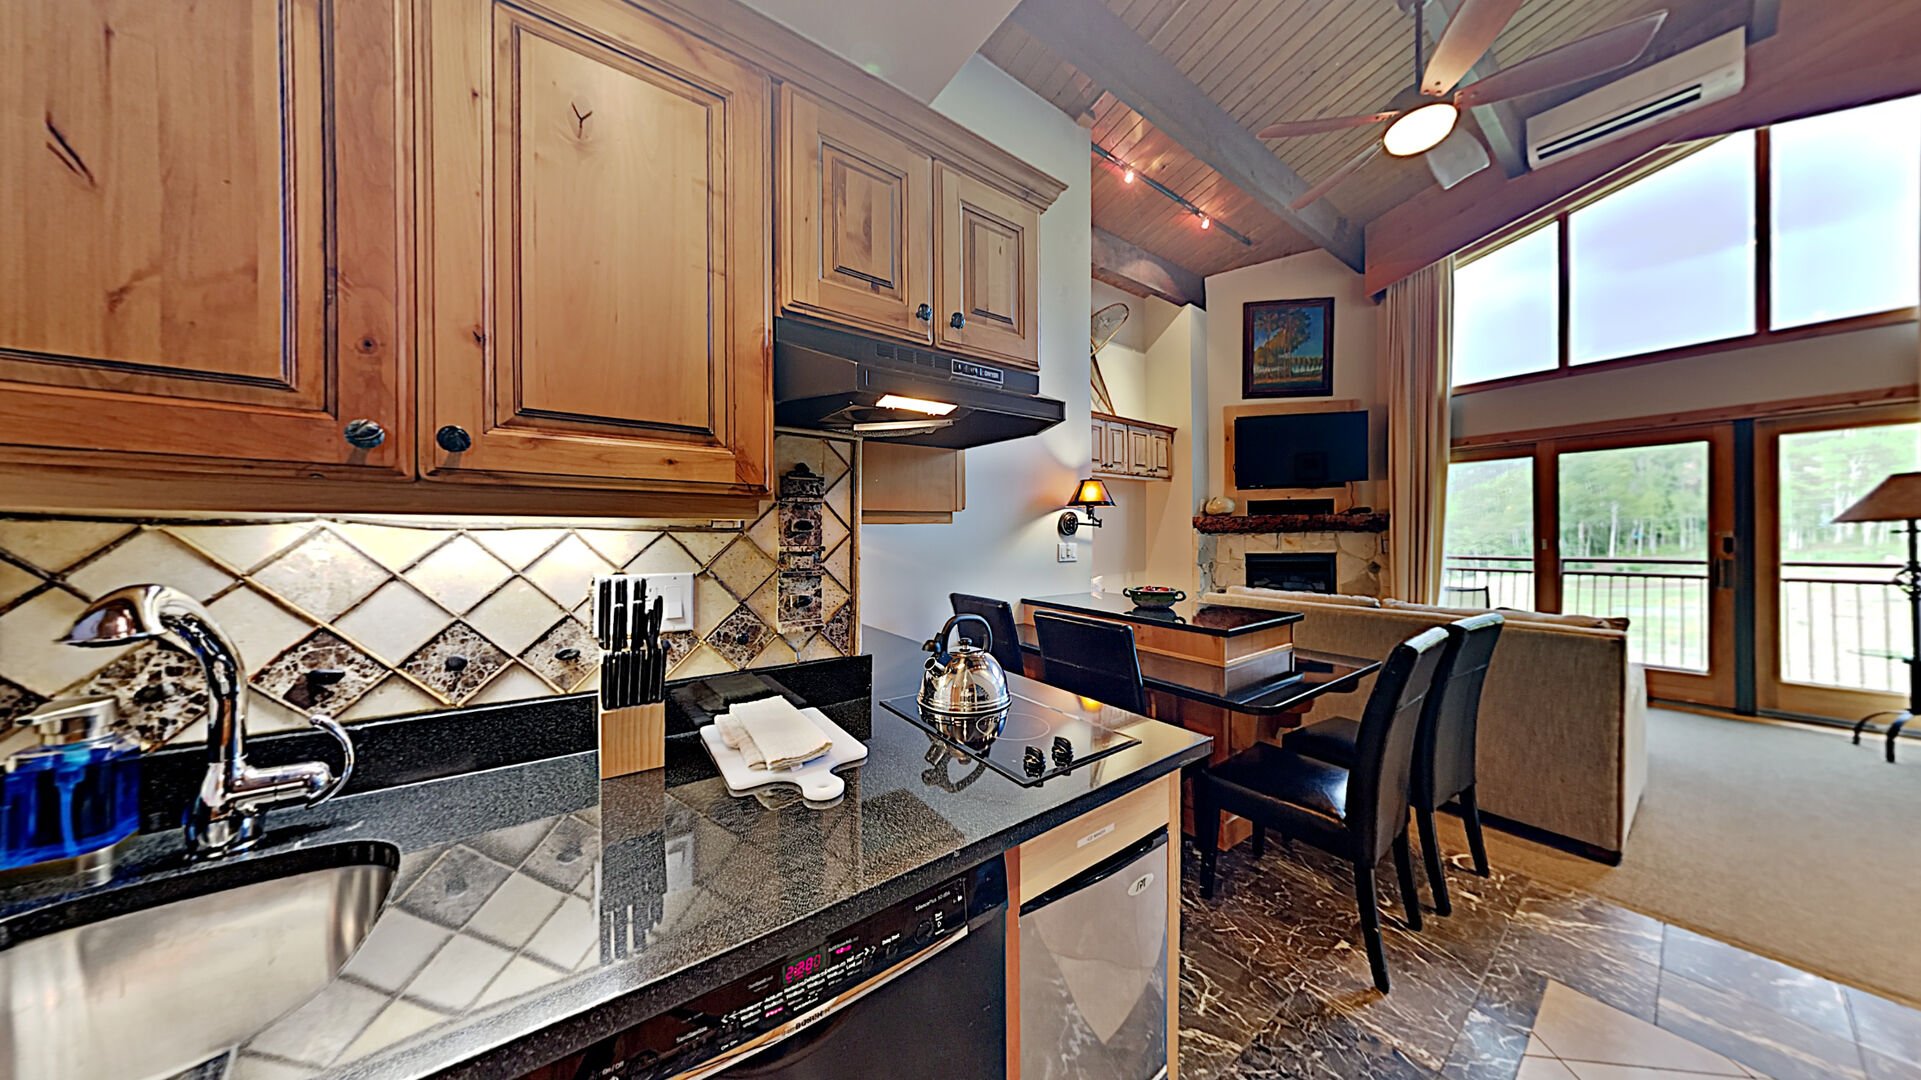 Check out the kitchen in our Snowmass summer rentals